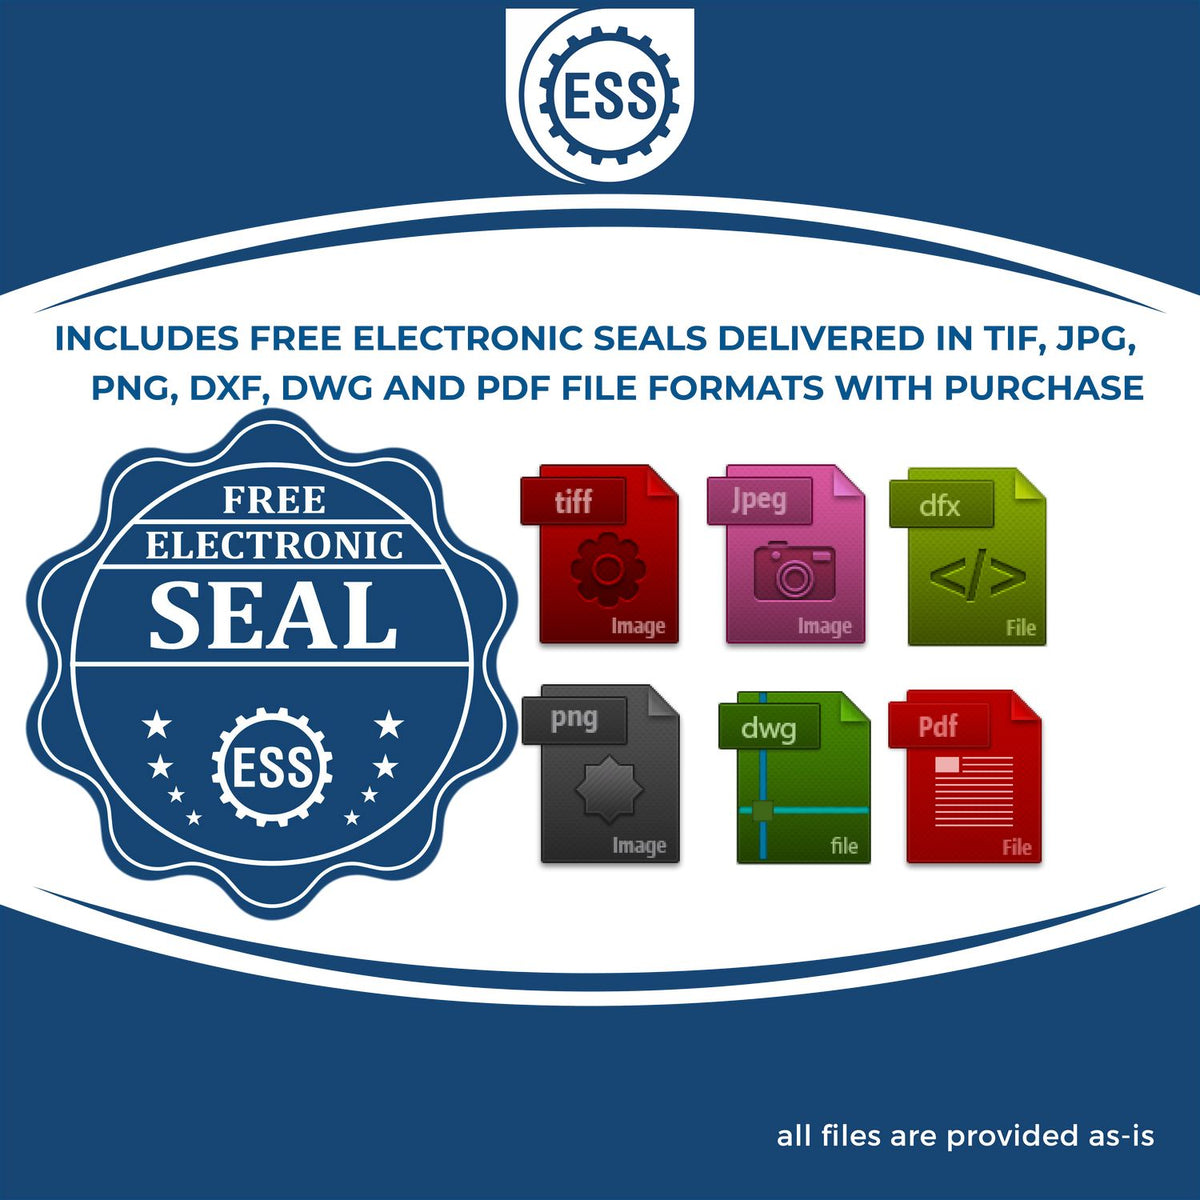 An infographic for the free electronic seal for the Kentucky Geologist Desk Seal illustrating the different file type icons such as DXF, DWG, TIF, JPG and PNG.